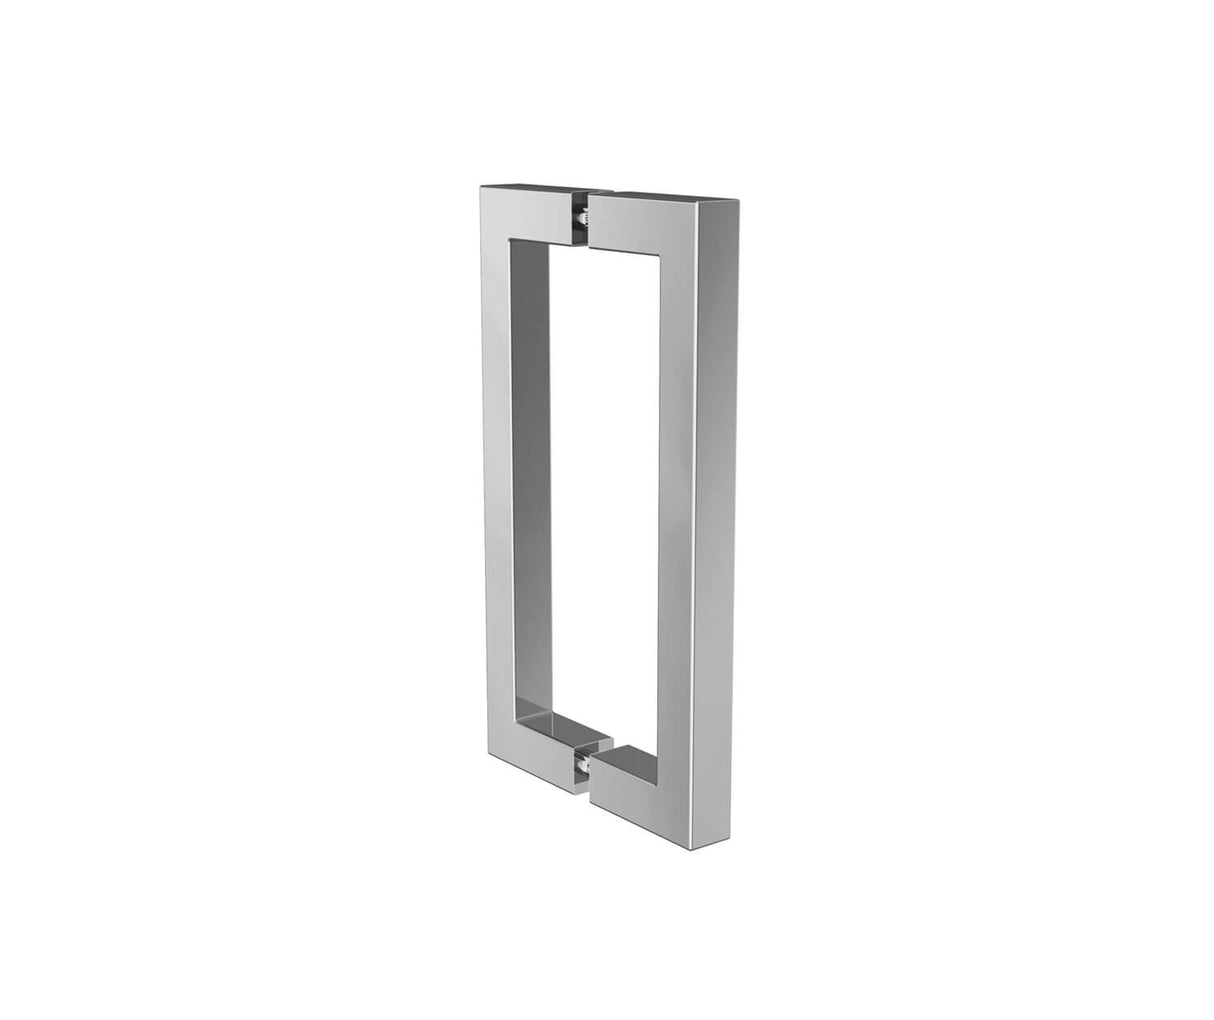 MAAX 137865-900-084-000 ModulR 48 x 32 x 78 in. 8mm Pivot Shower Door for Wall-mount Installation with Clear glass in Chrome